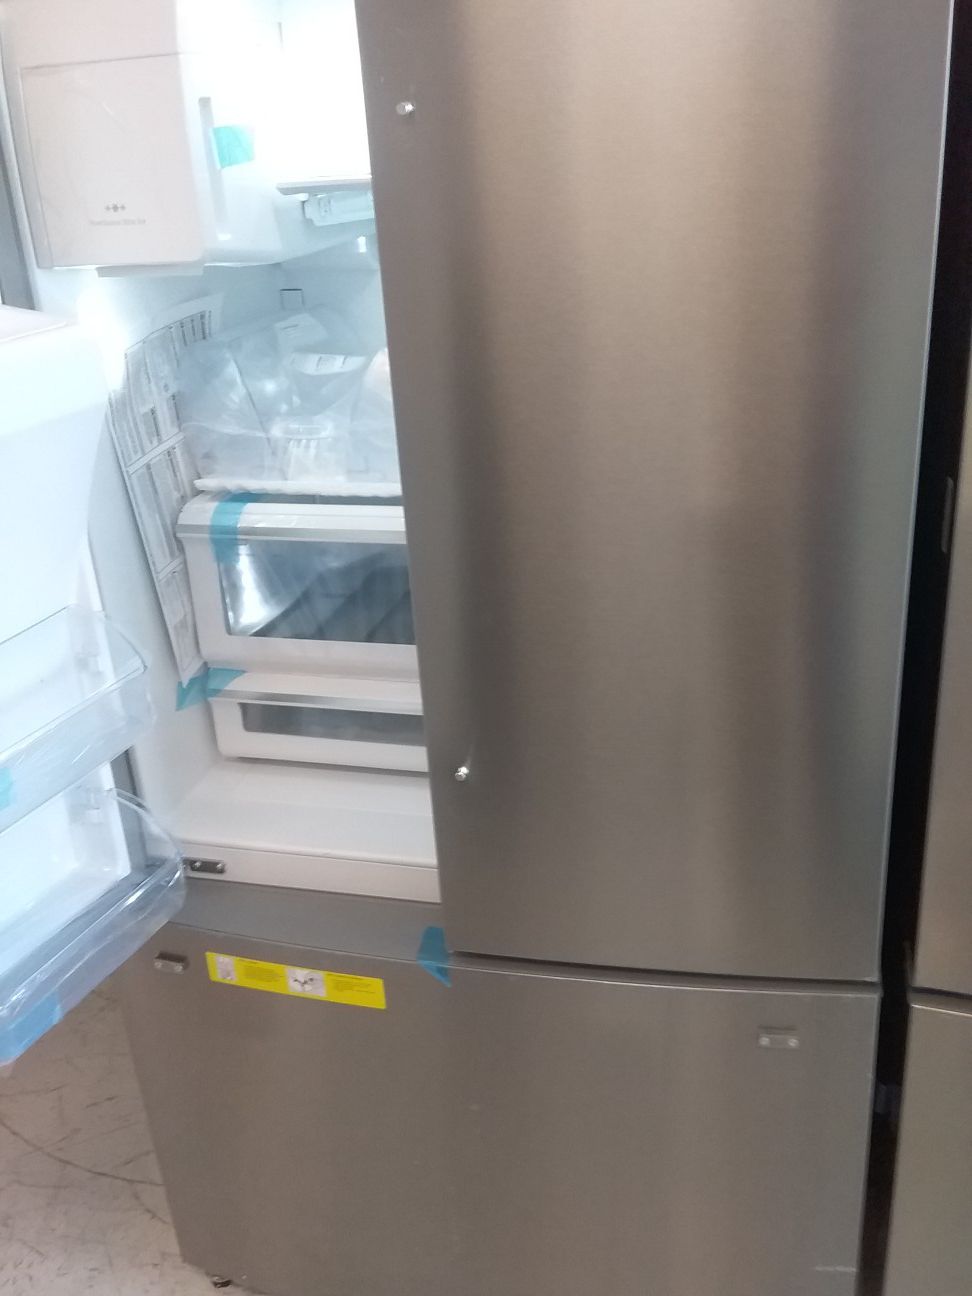 Frigidaire French doors stainless steel refrigerator new open box good condition 6months